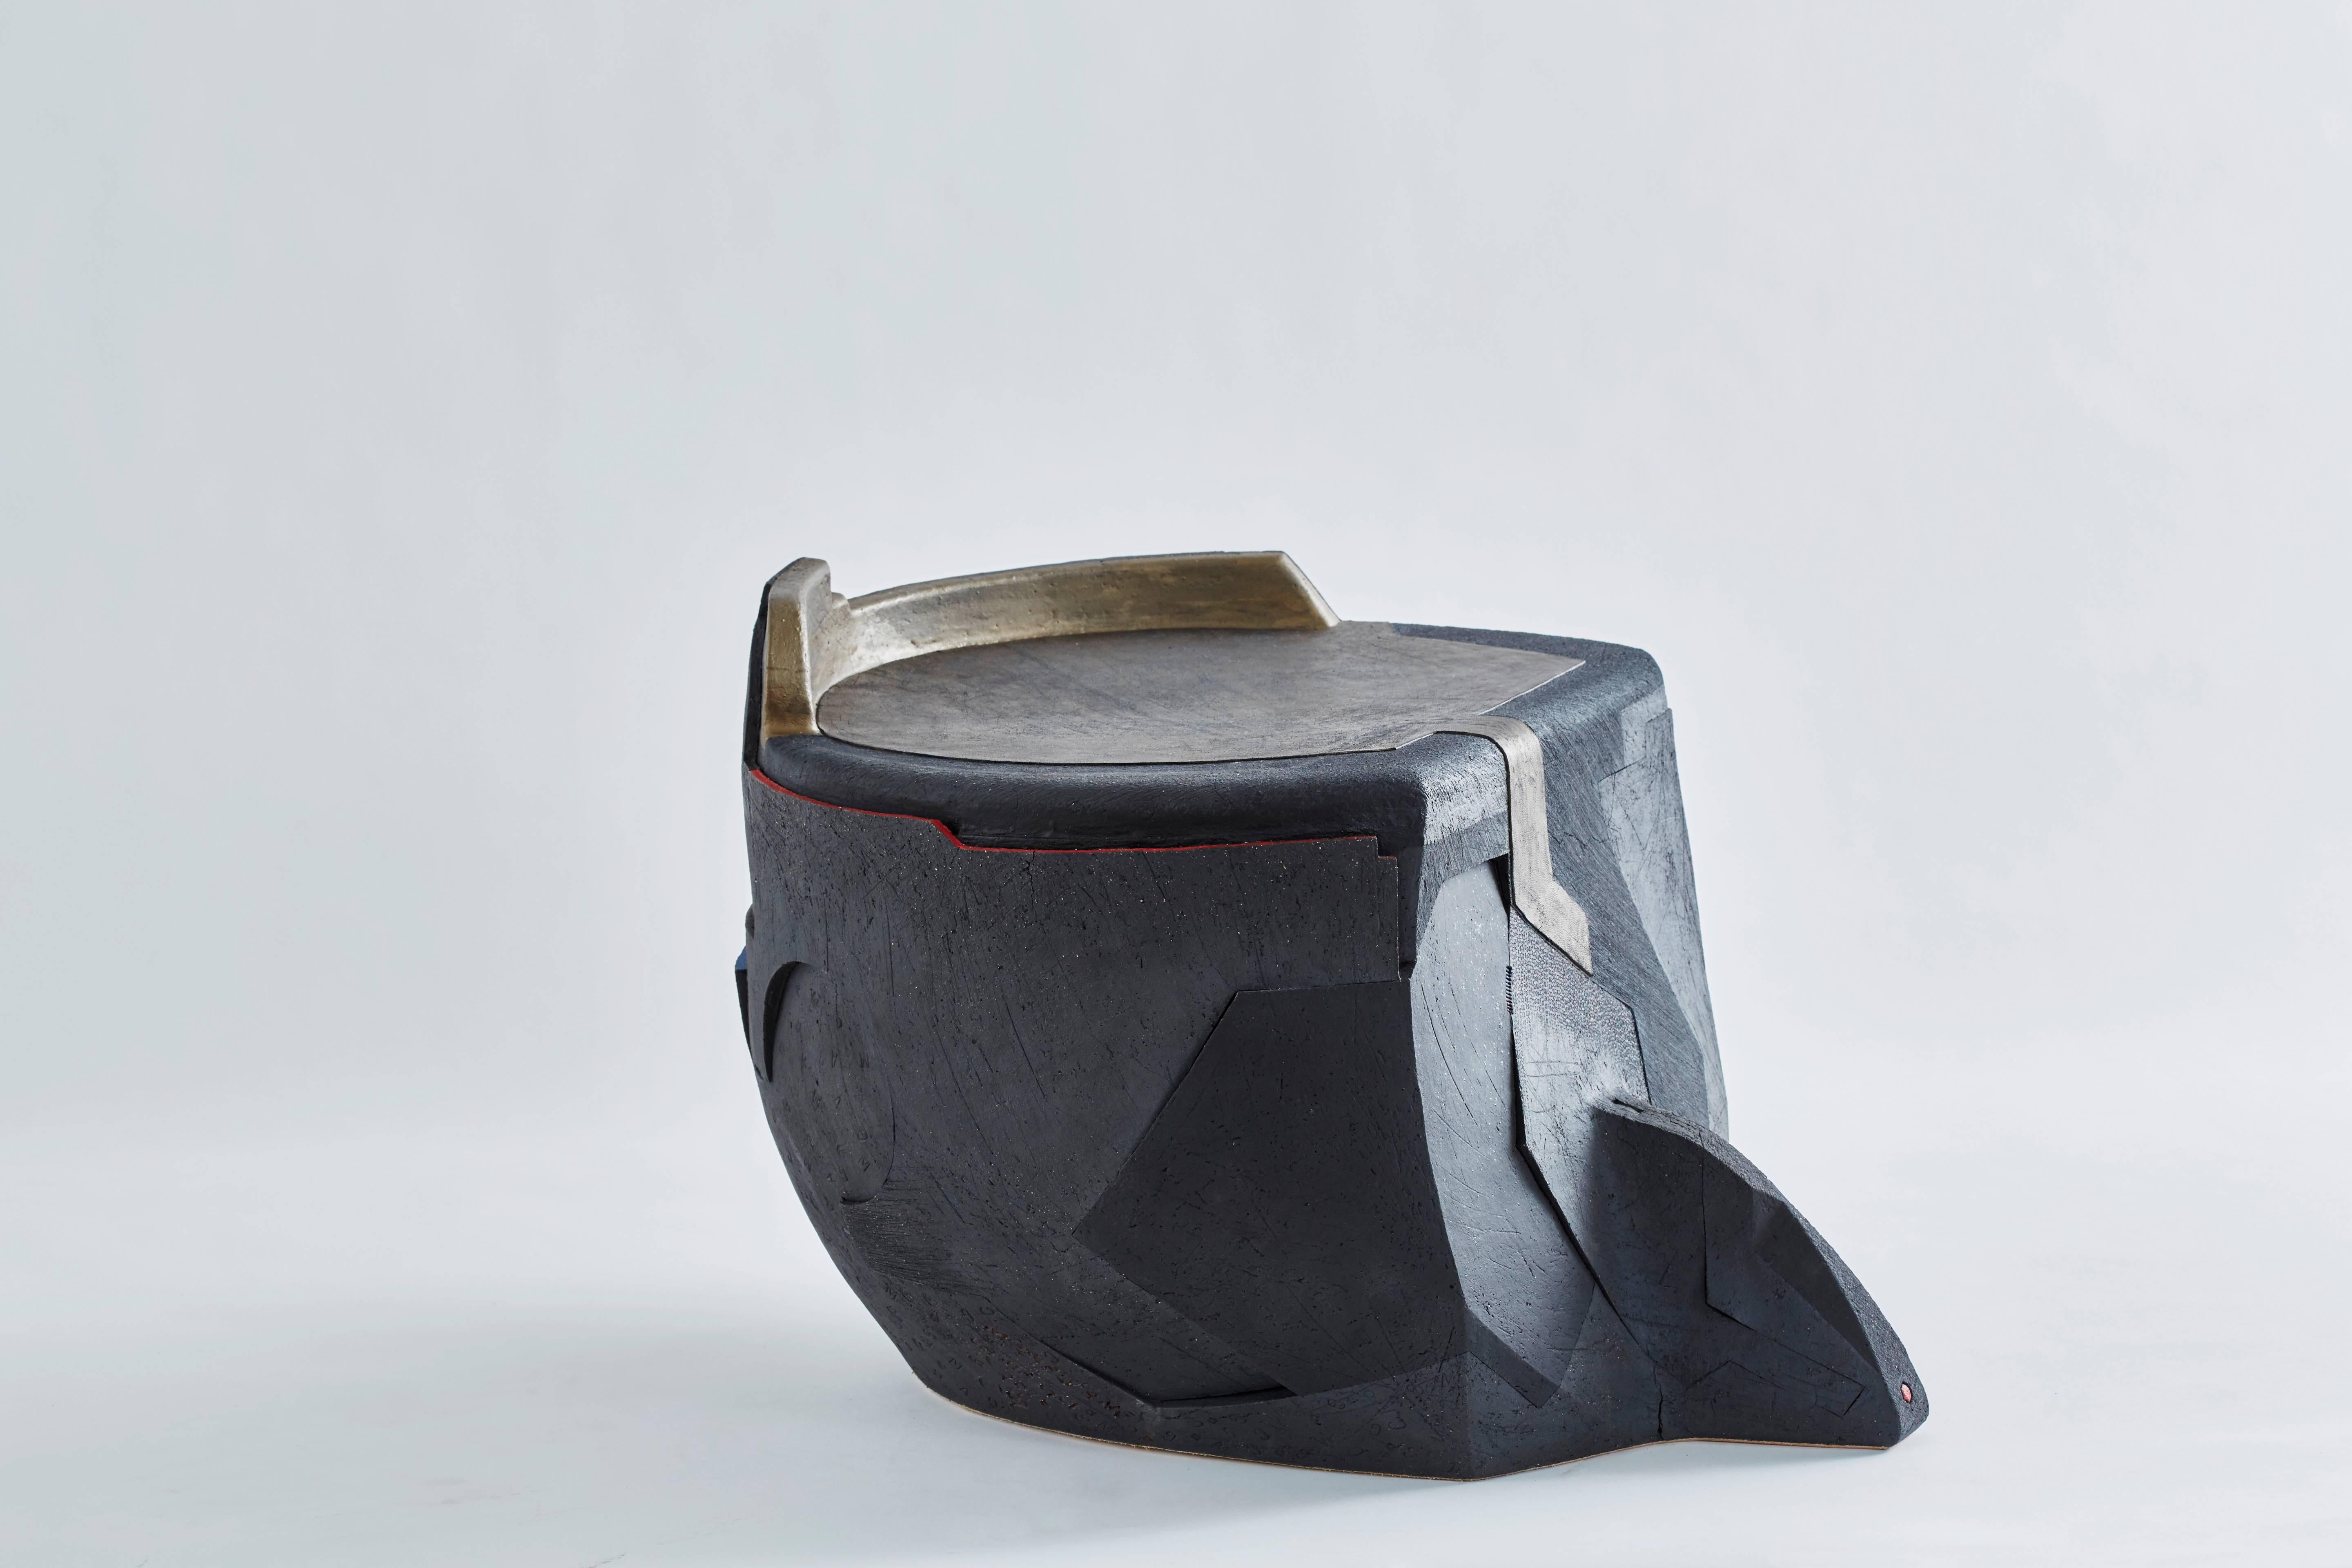 Andile Dyalvane [South African, b. 1978]
Soze Nyanga (Mud Table/Stool), 2015
Black clay
Measures: 19 x 30 x 23.25 inches
48.5 x 76 x 59 cm
Signed: M Dyalvane 2015 CAMA Gu

Andile Dyalvane was born in Ngobozana, a small village in the Eastern Cape